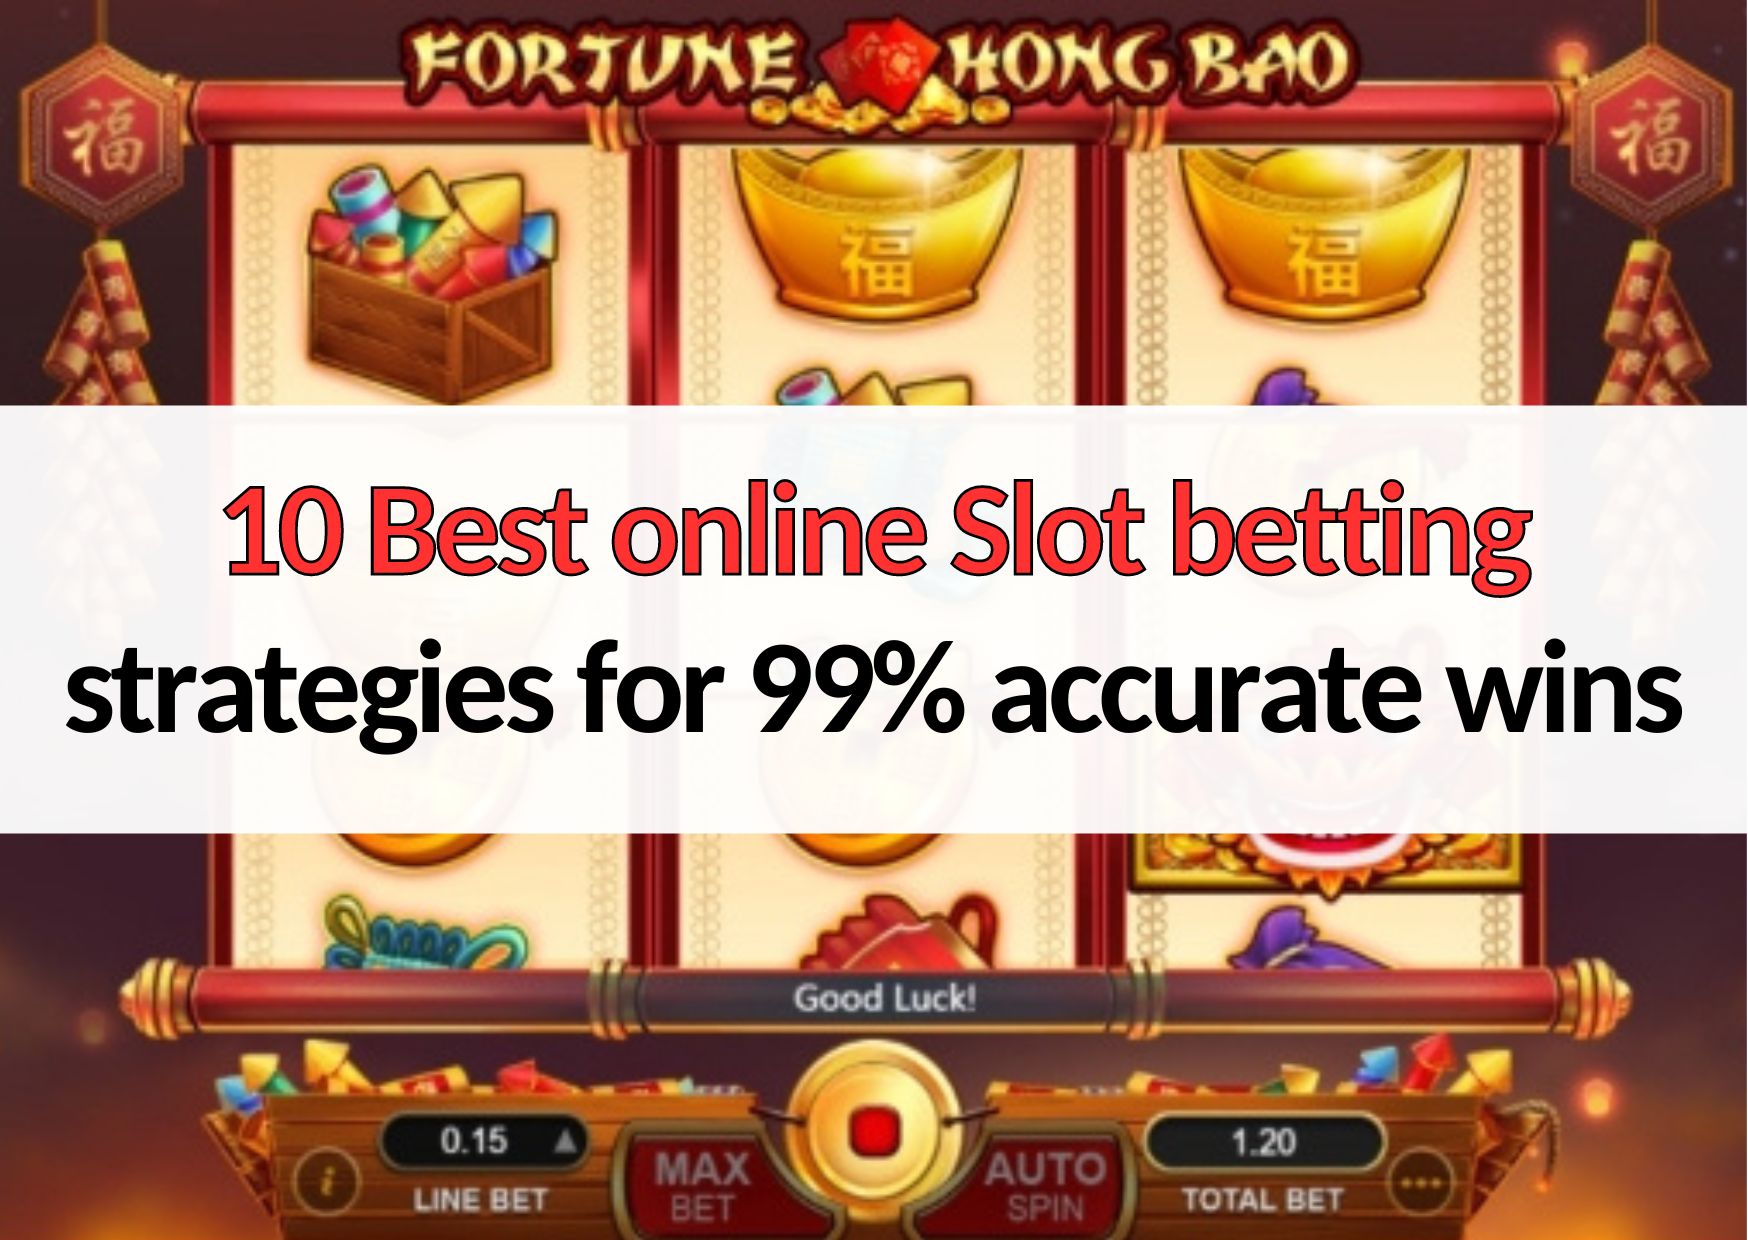 10 best online slot betting strategies for accurate wins